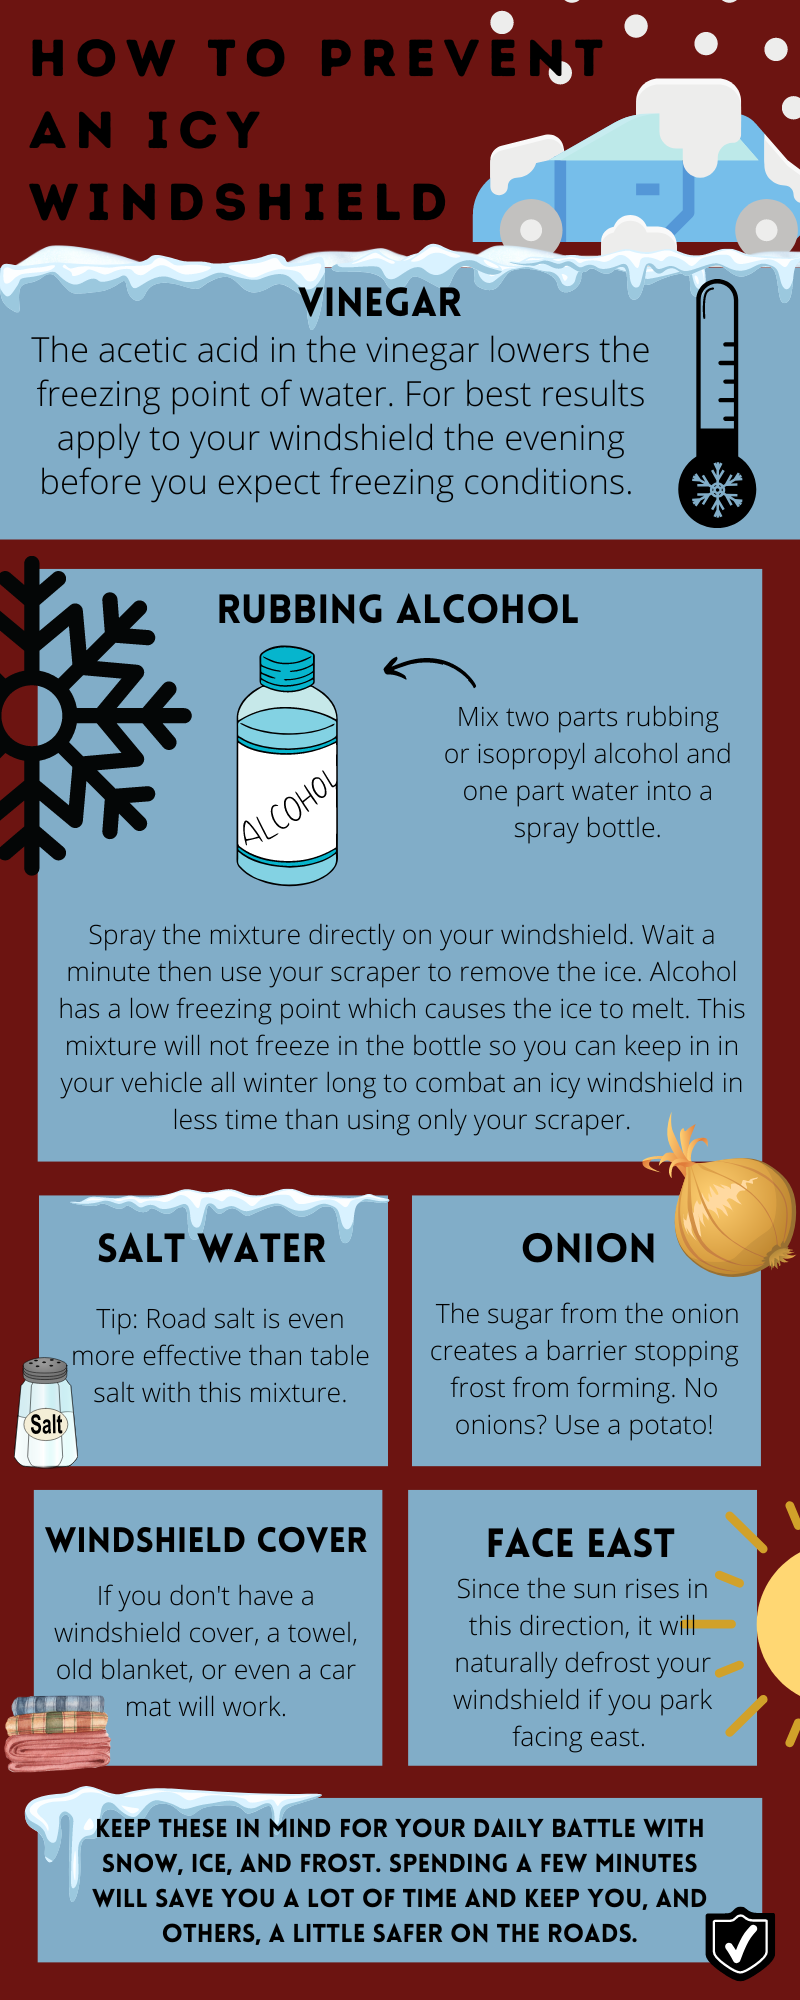 How to Prevent an Icy Windshield infographic showing numerous ways to prevent an icy windshield.